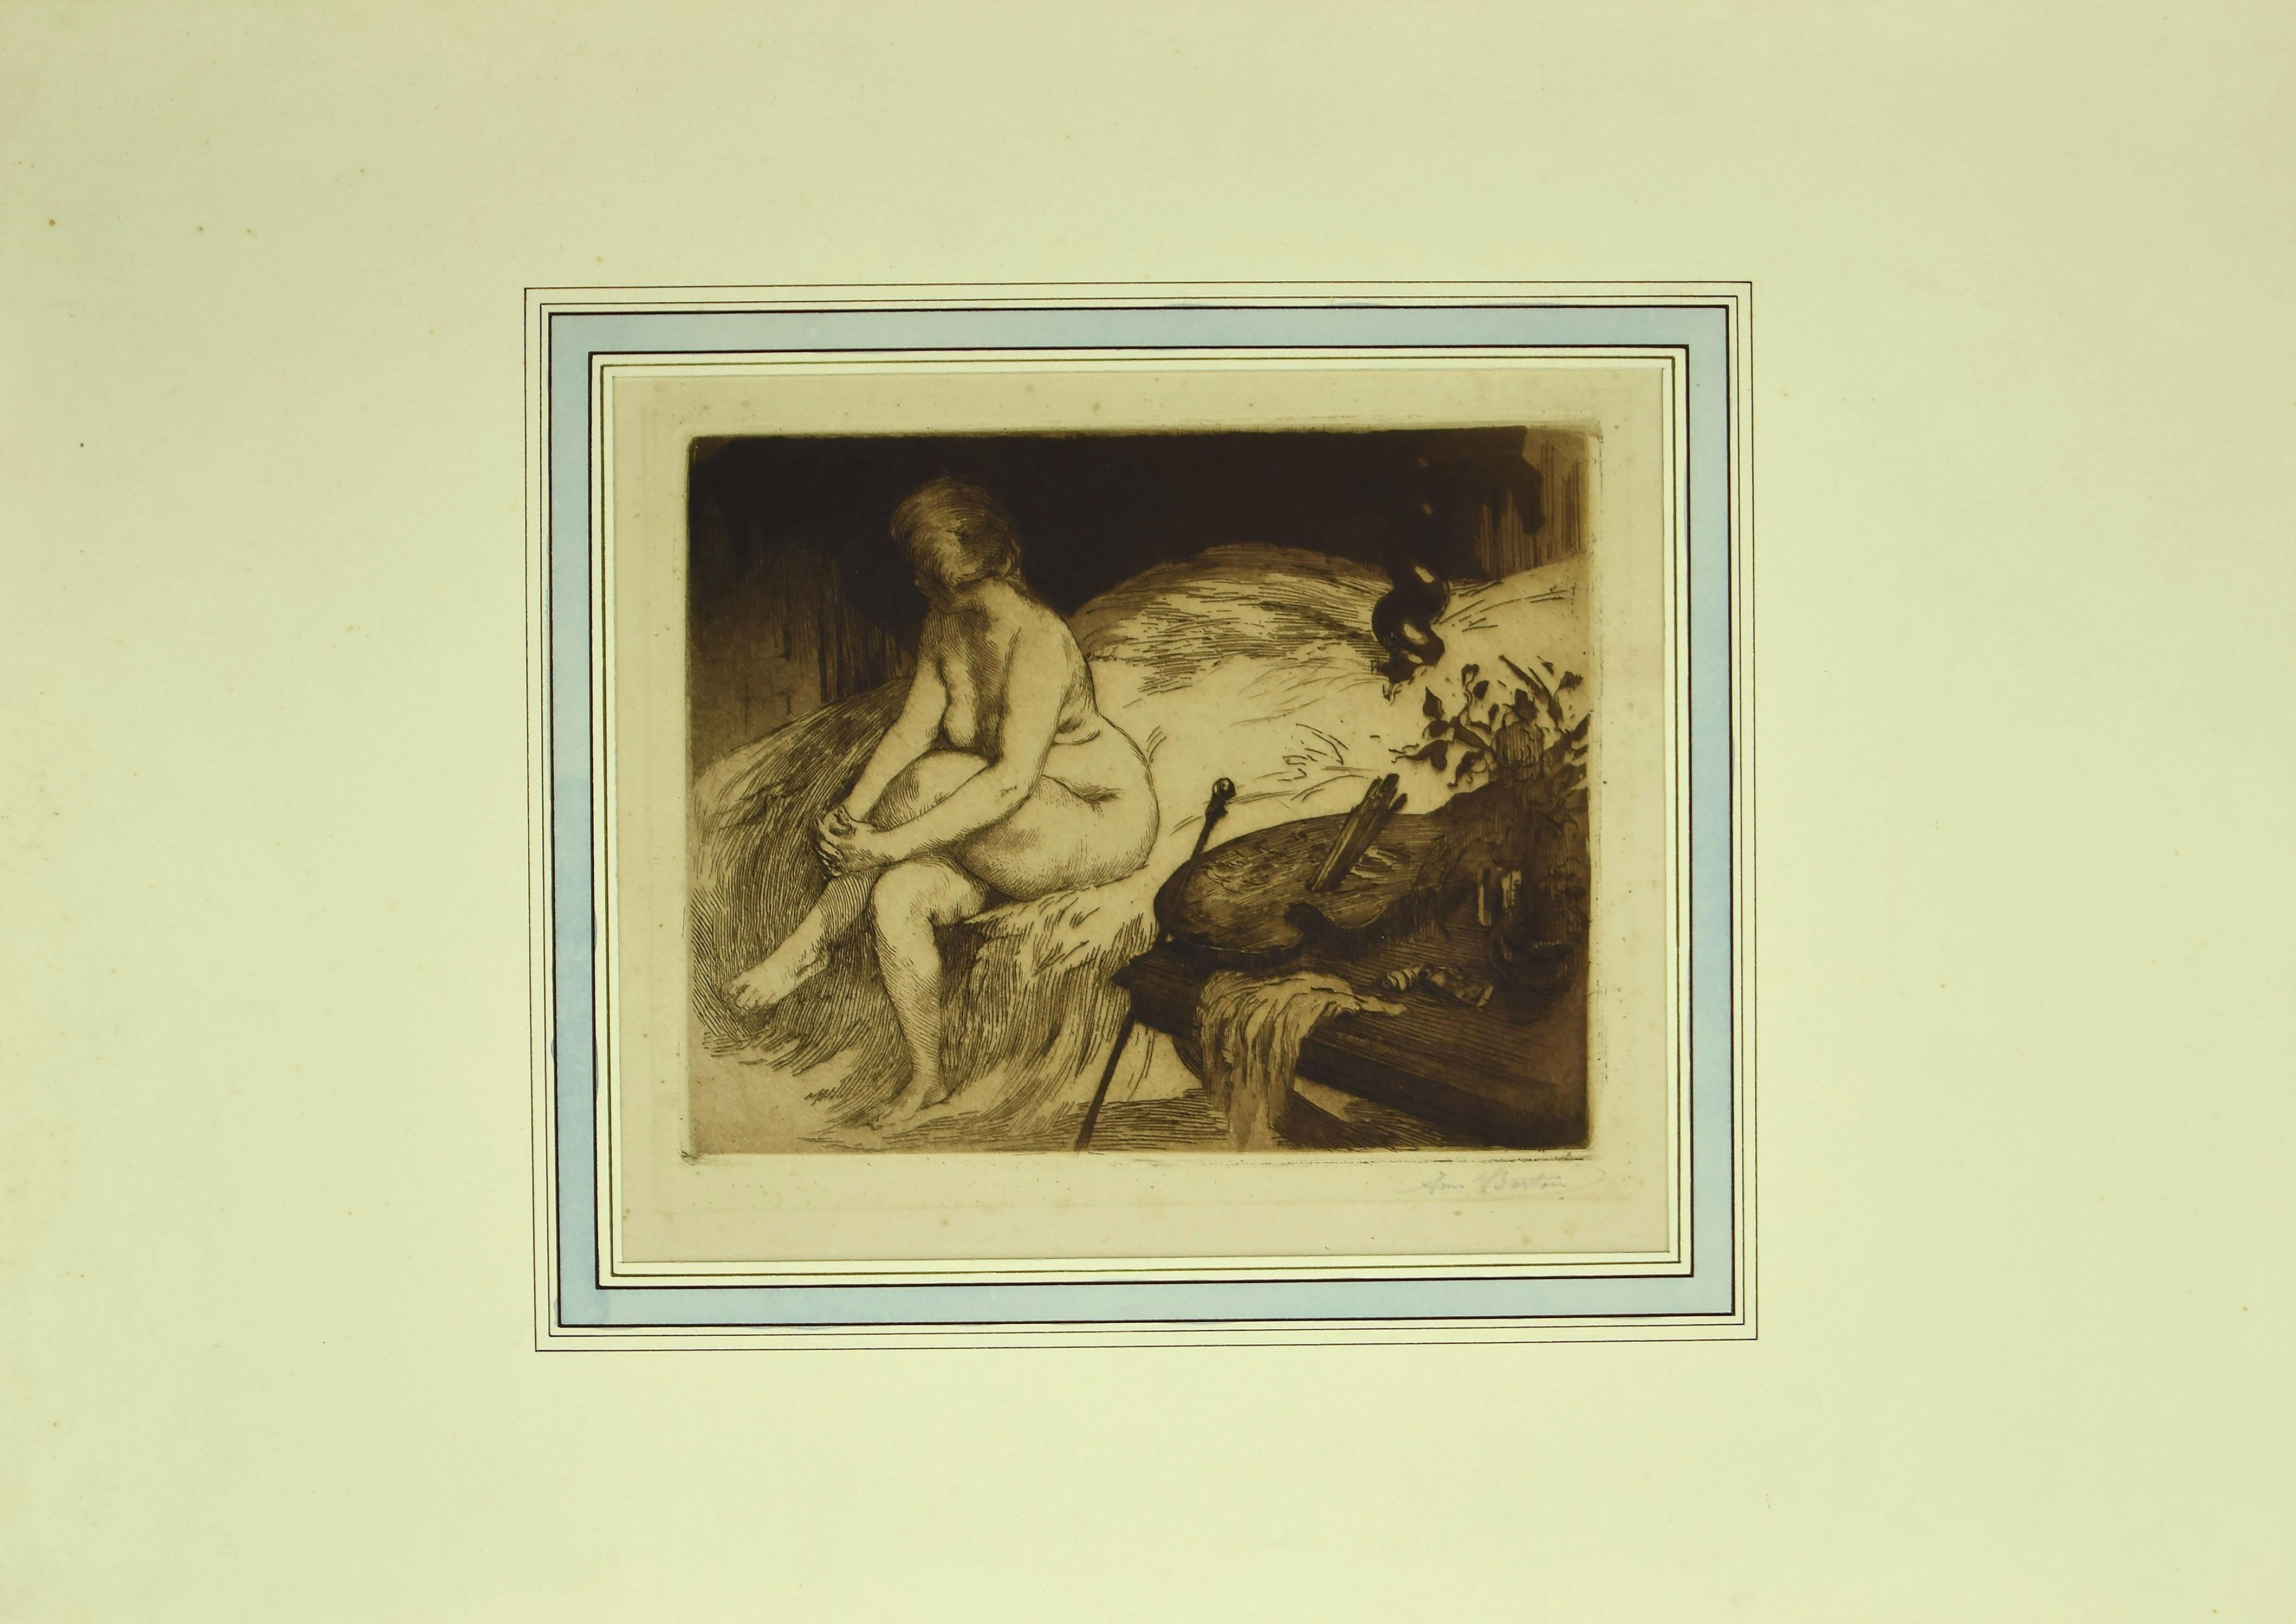 Nude - Etching - 19th Century - Print by Armand Berton